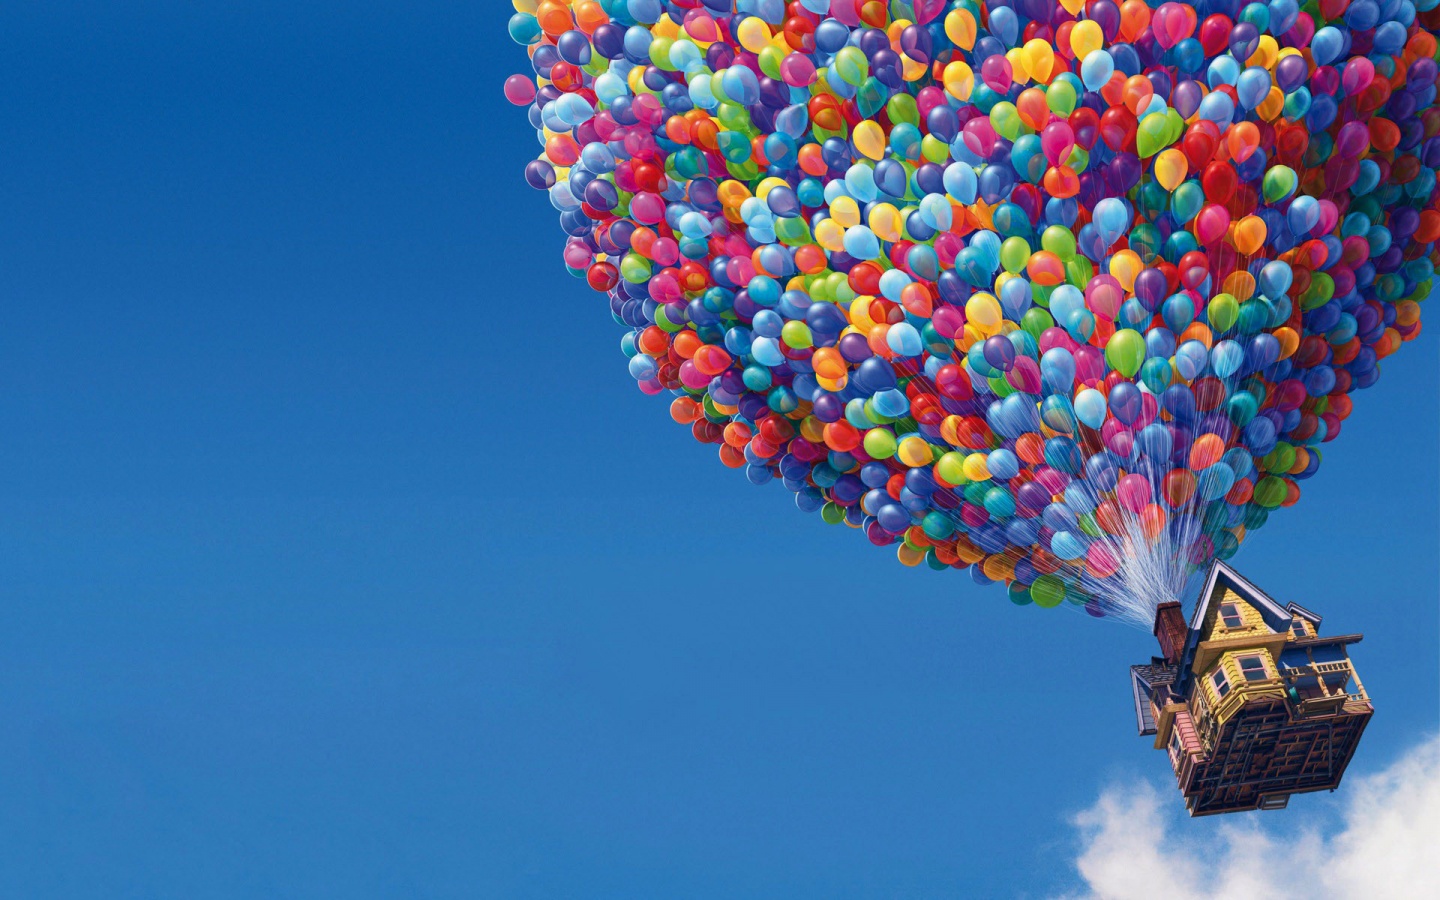 up_movie_balloons_house-1440x900